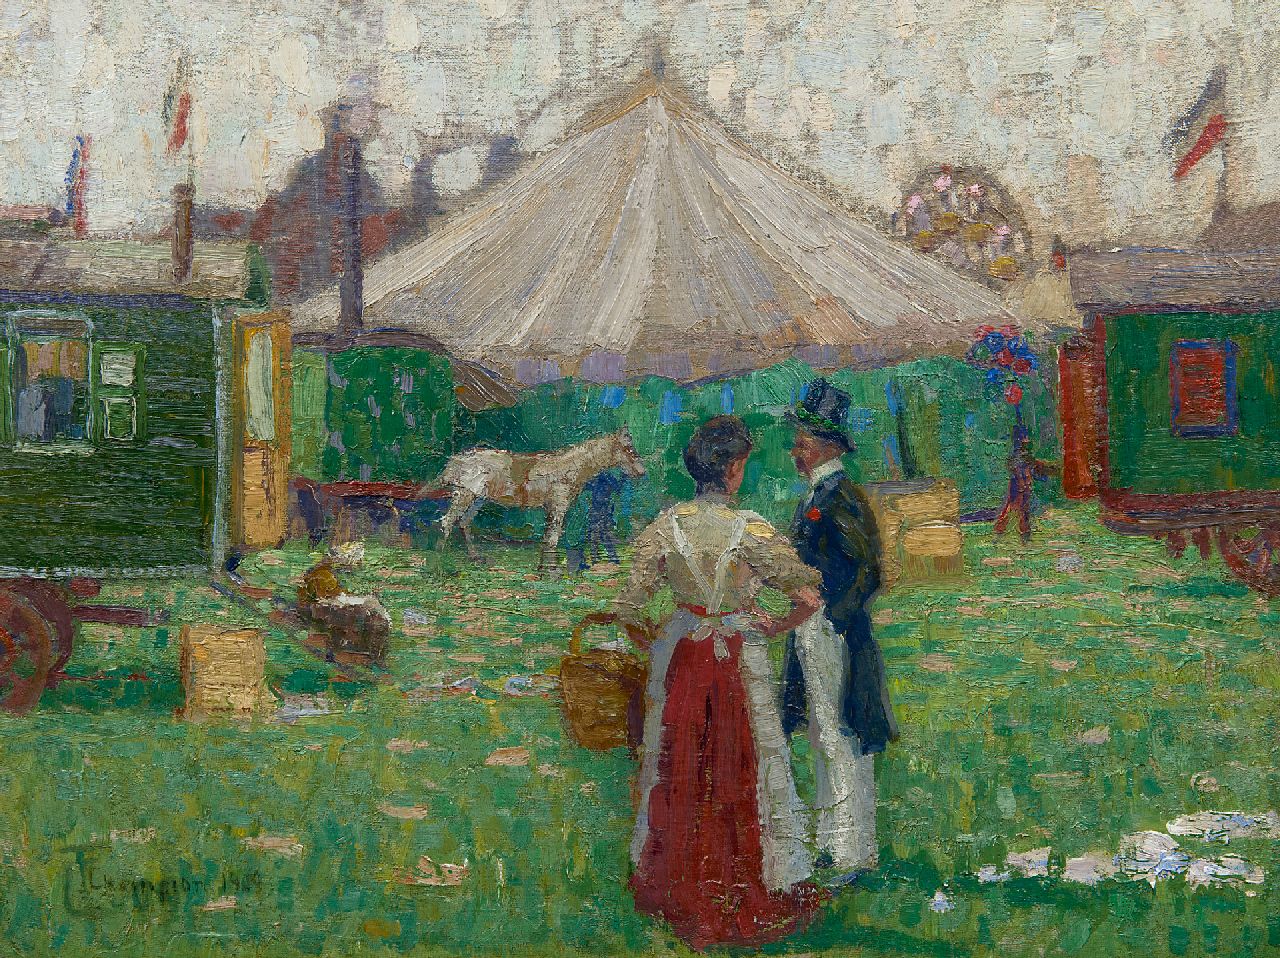 Theo Champion | At the fairground, oil on canvas laid down on board, 44.6 x 58.3 cm, signed l.l. and dated 1909